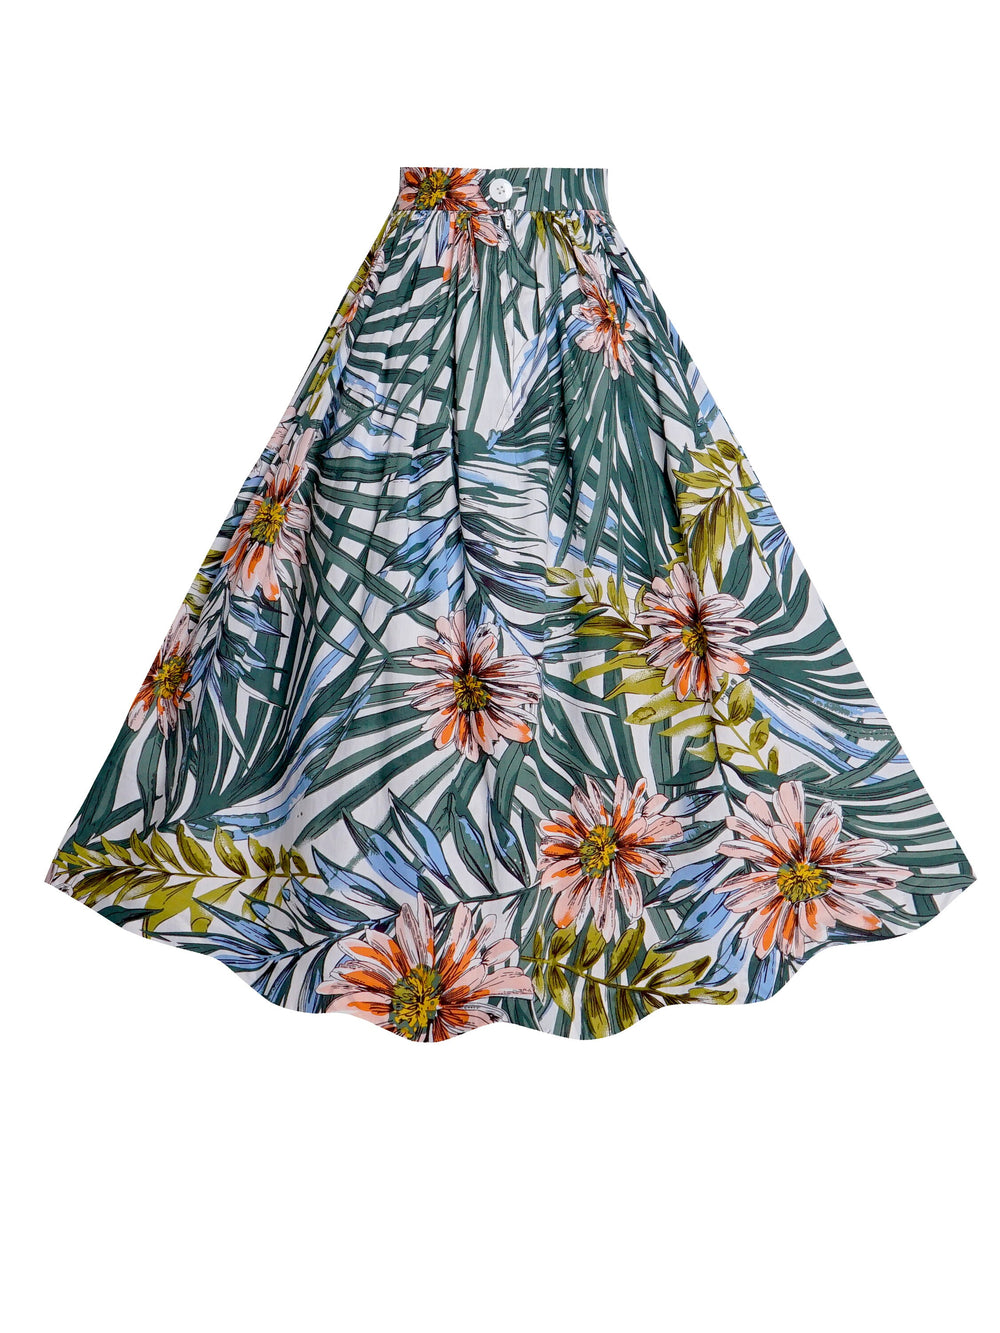 RTS - Size S - Lola Skirt White "Tropical Bloom"